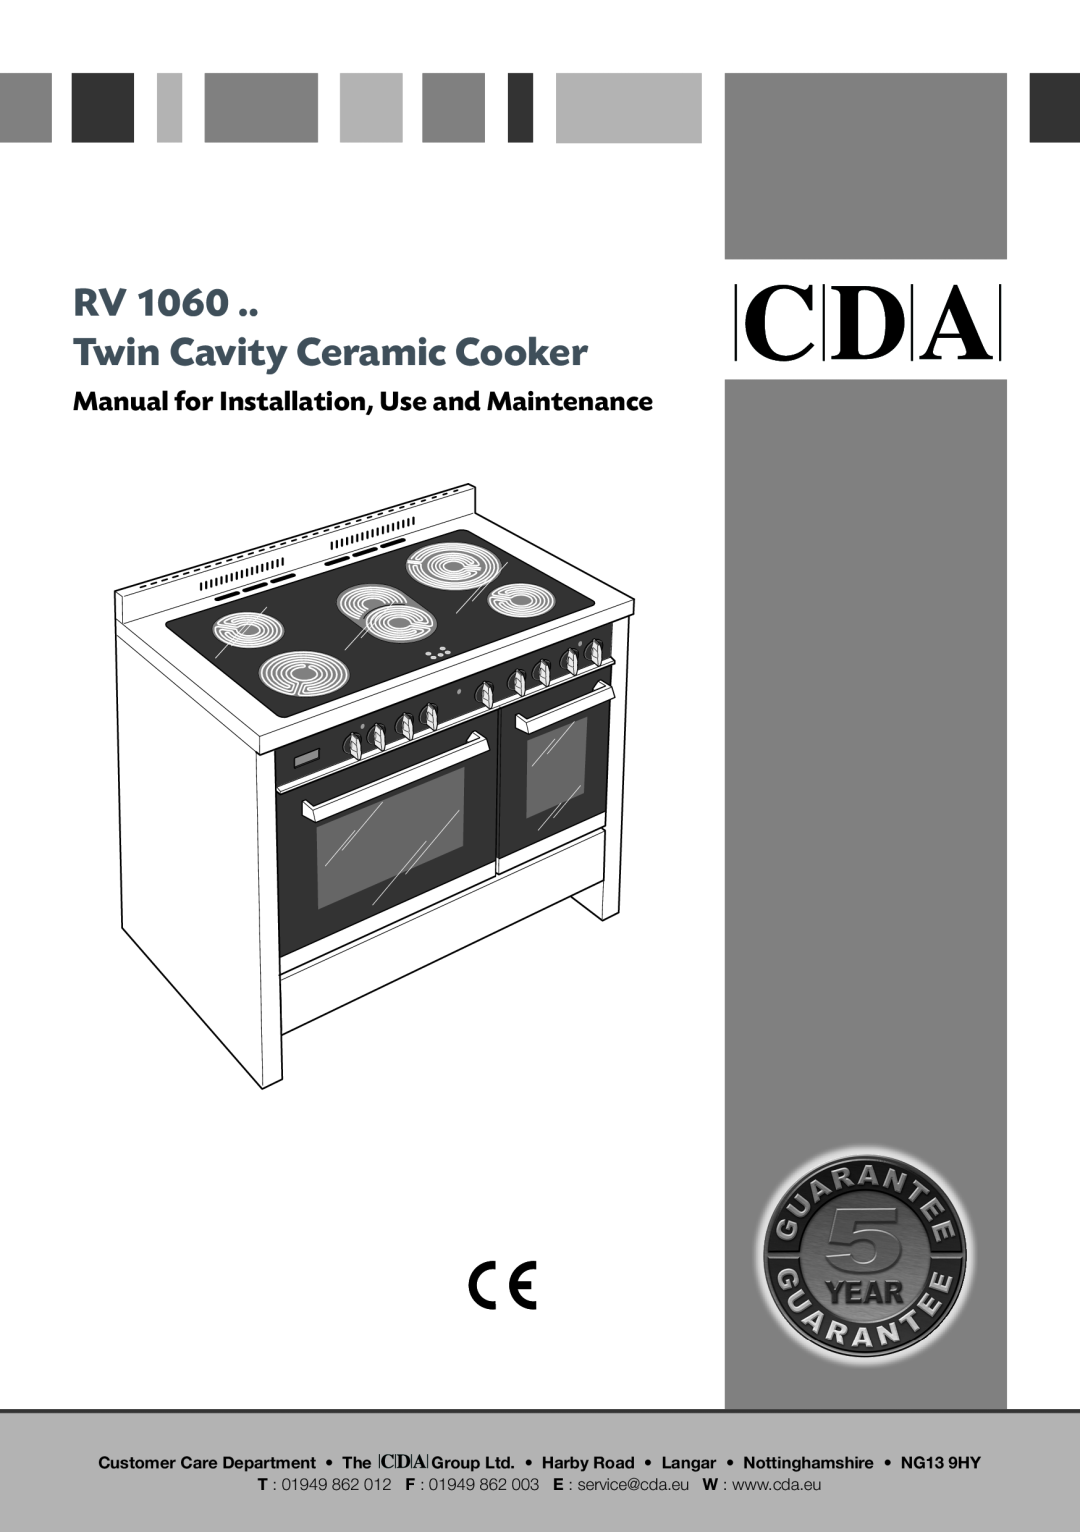 CDA RV 1060 manual RV Twin Cavity Ceramic Cooker, Manual for Installation, Use and Maintenance 